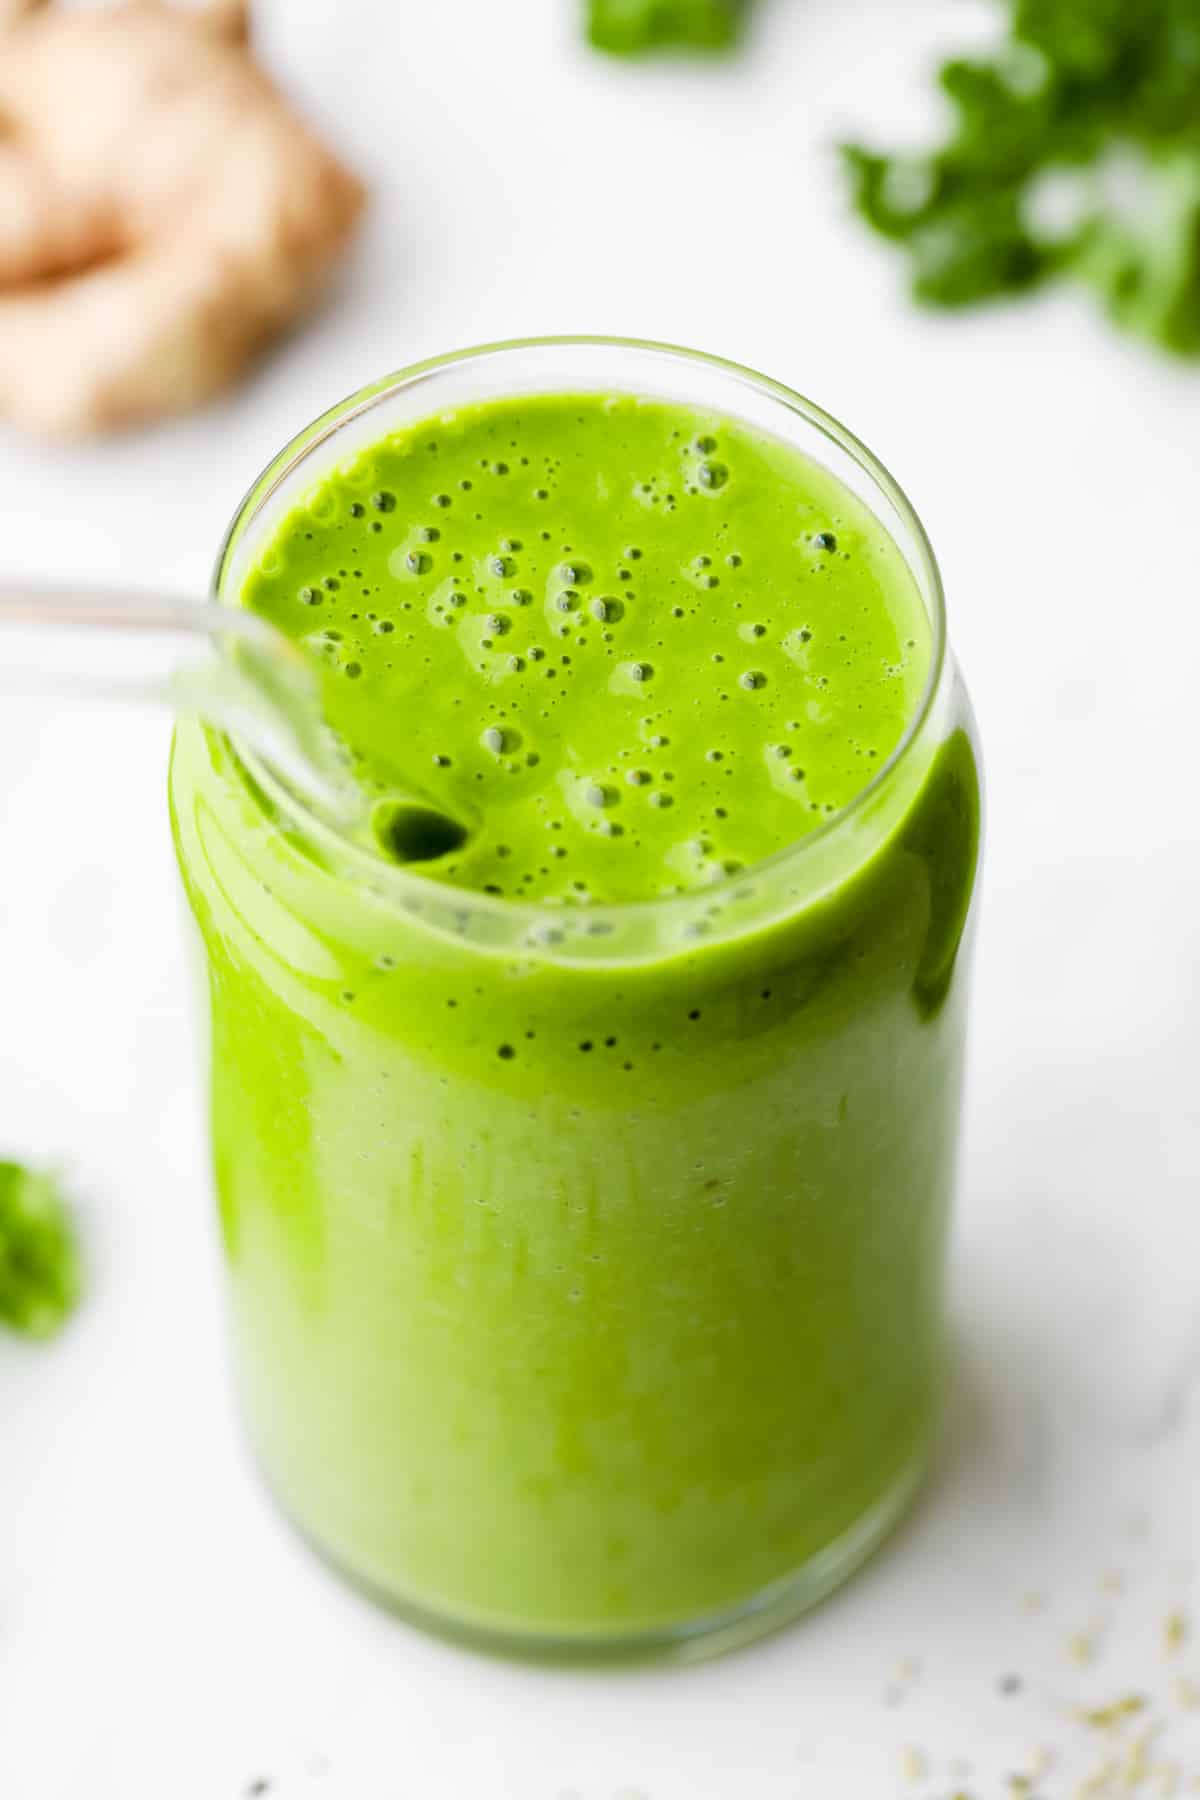 https://www.noracooks.com/wp-content/uploads/2023/09/kale-smoothie-3-1200x1800.jpg